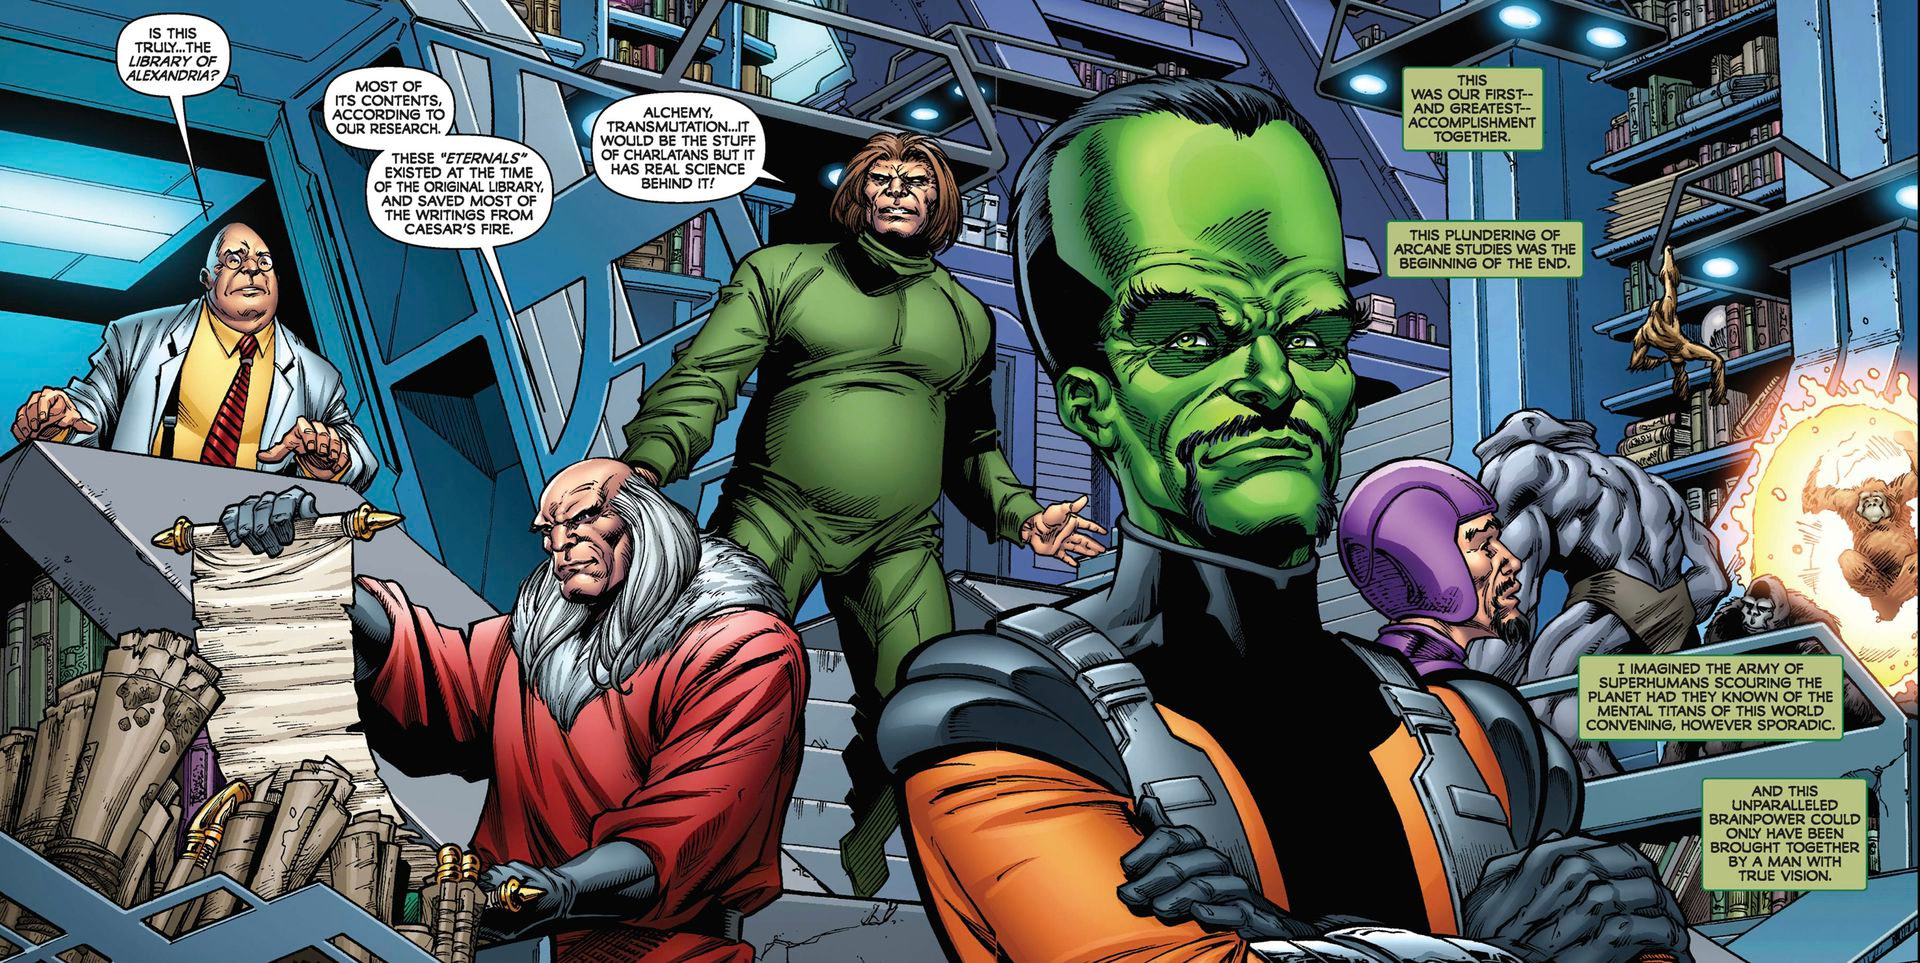 LtR: Egghead, the Red Ghost, the Mad Thinker, the Leader, and the Wizard, pilfering materials from the Library of Alexandria from the headquarters of the Eternals in Fall of the Hulks Alpha #1 (2009).